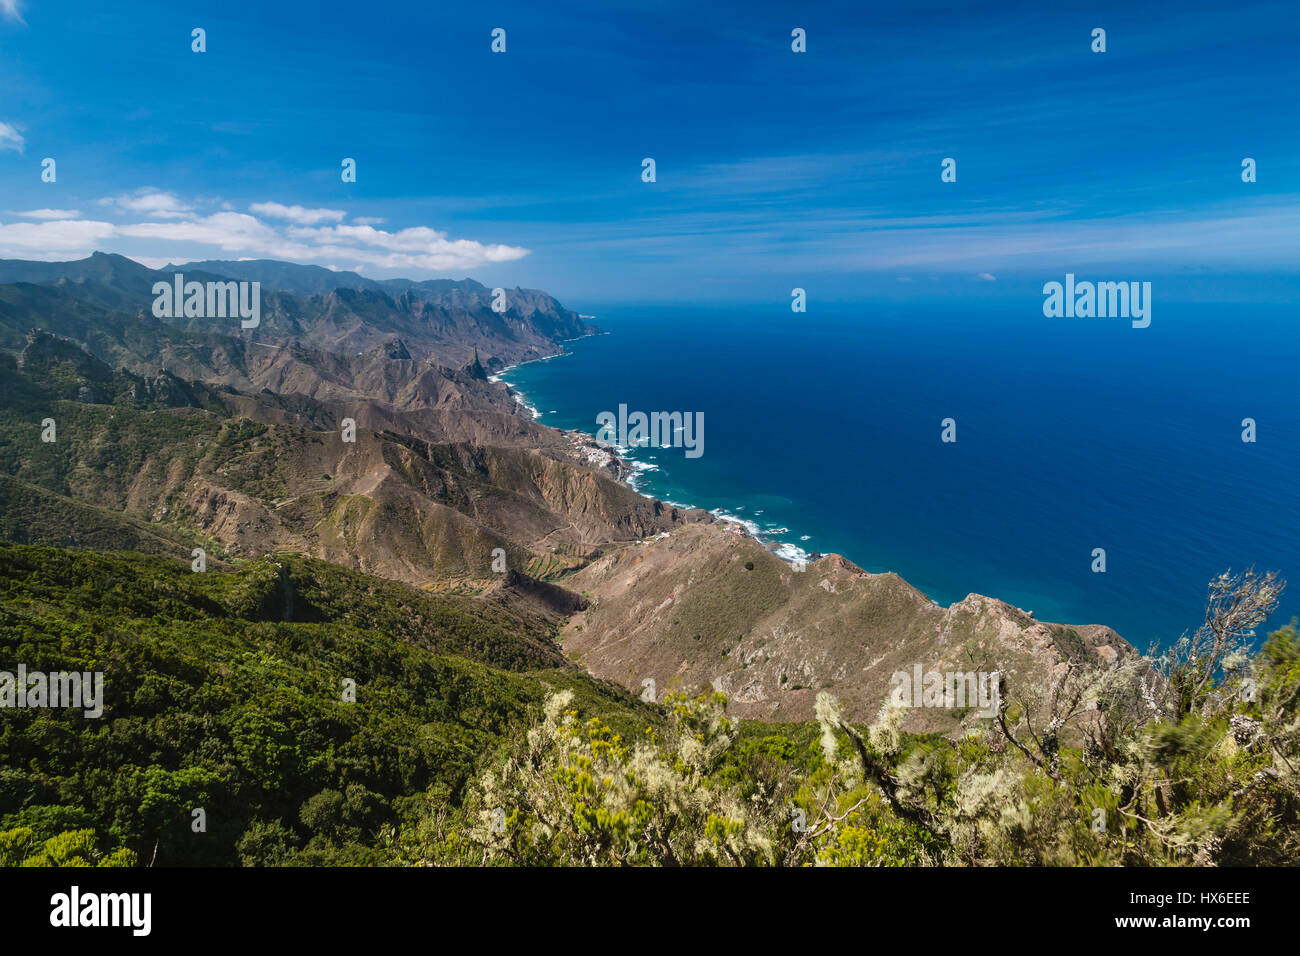 View from the Anaga mountains down to the coast at Almaciga in Tenerife, Spain. Stock Photo